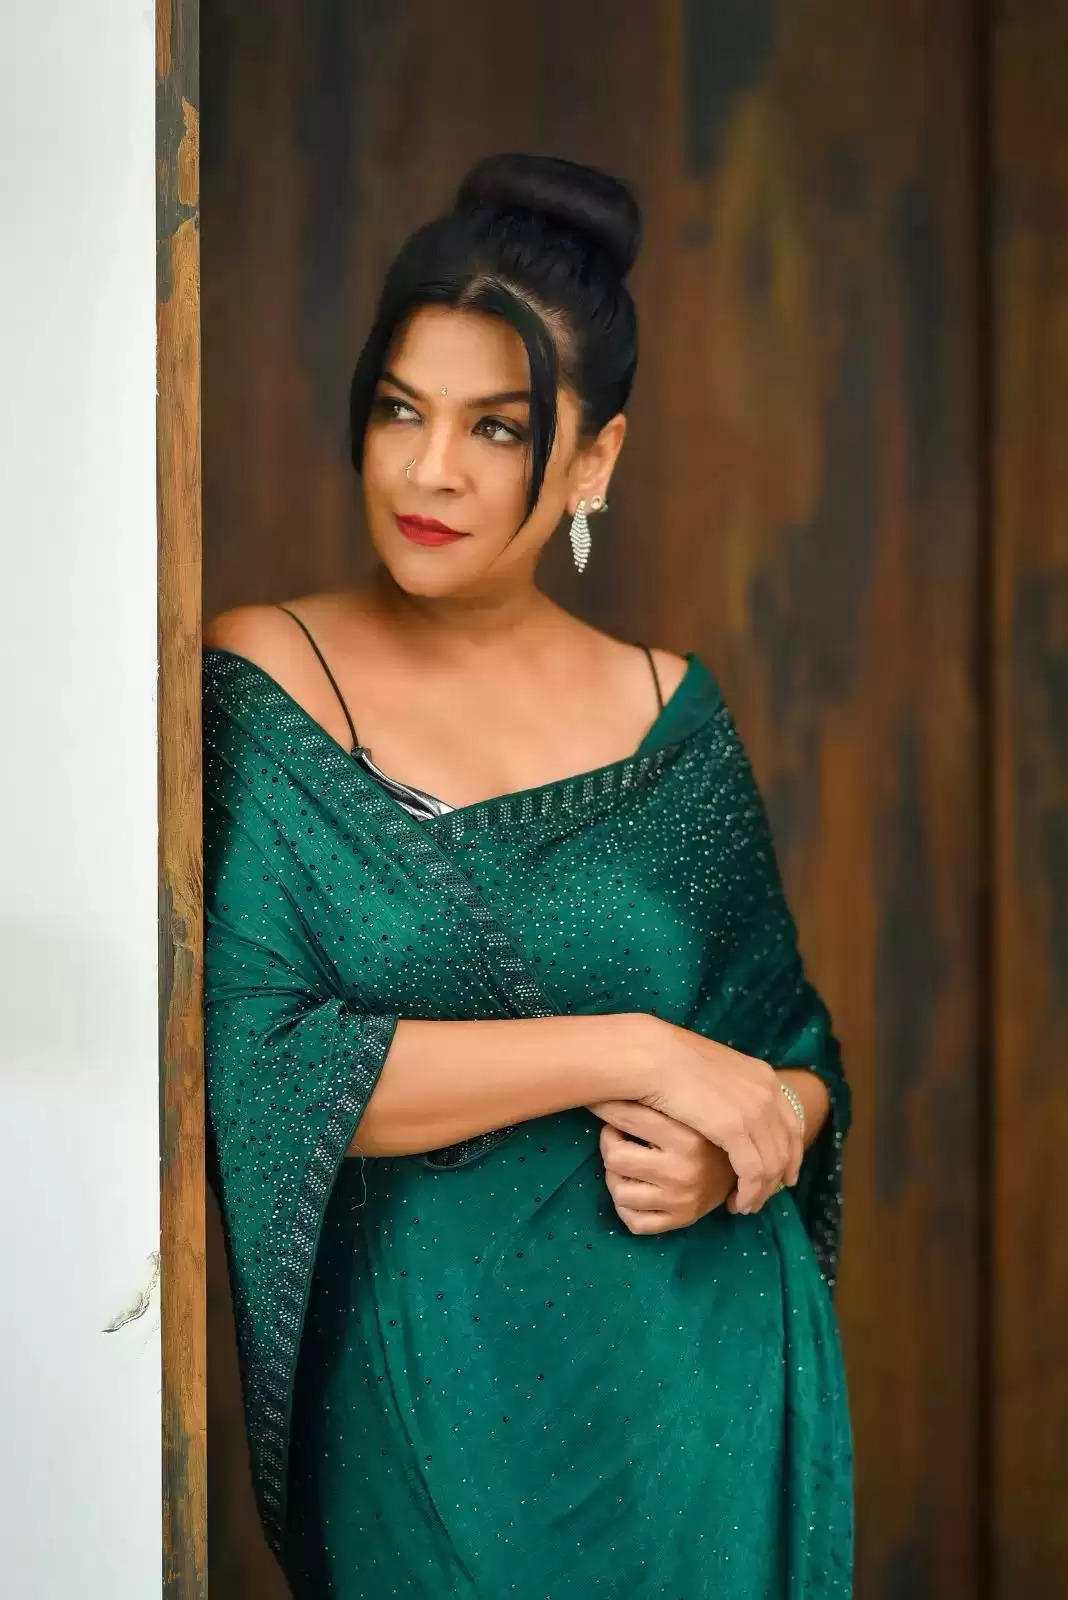 Namita Lal: Cinema and music surrounded me from a very young age Actress-producer Namita Lal who is known for her projects